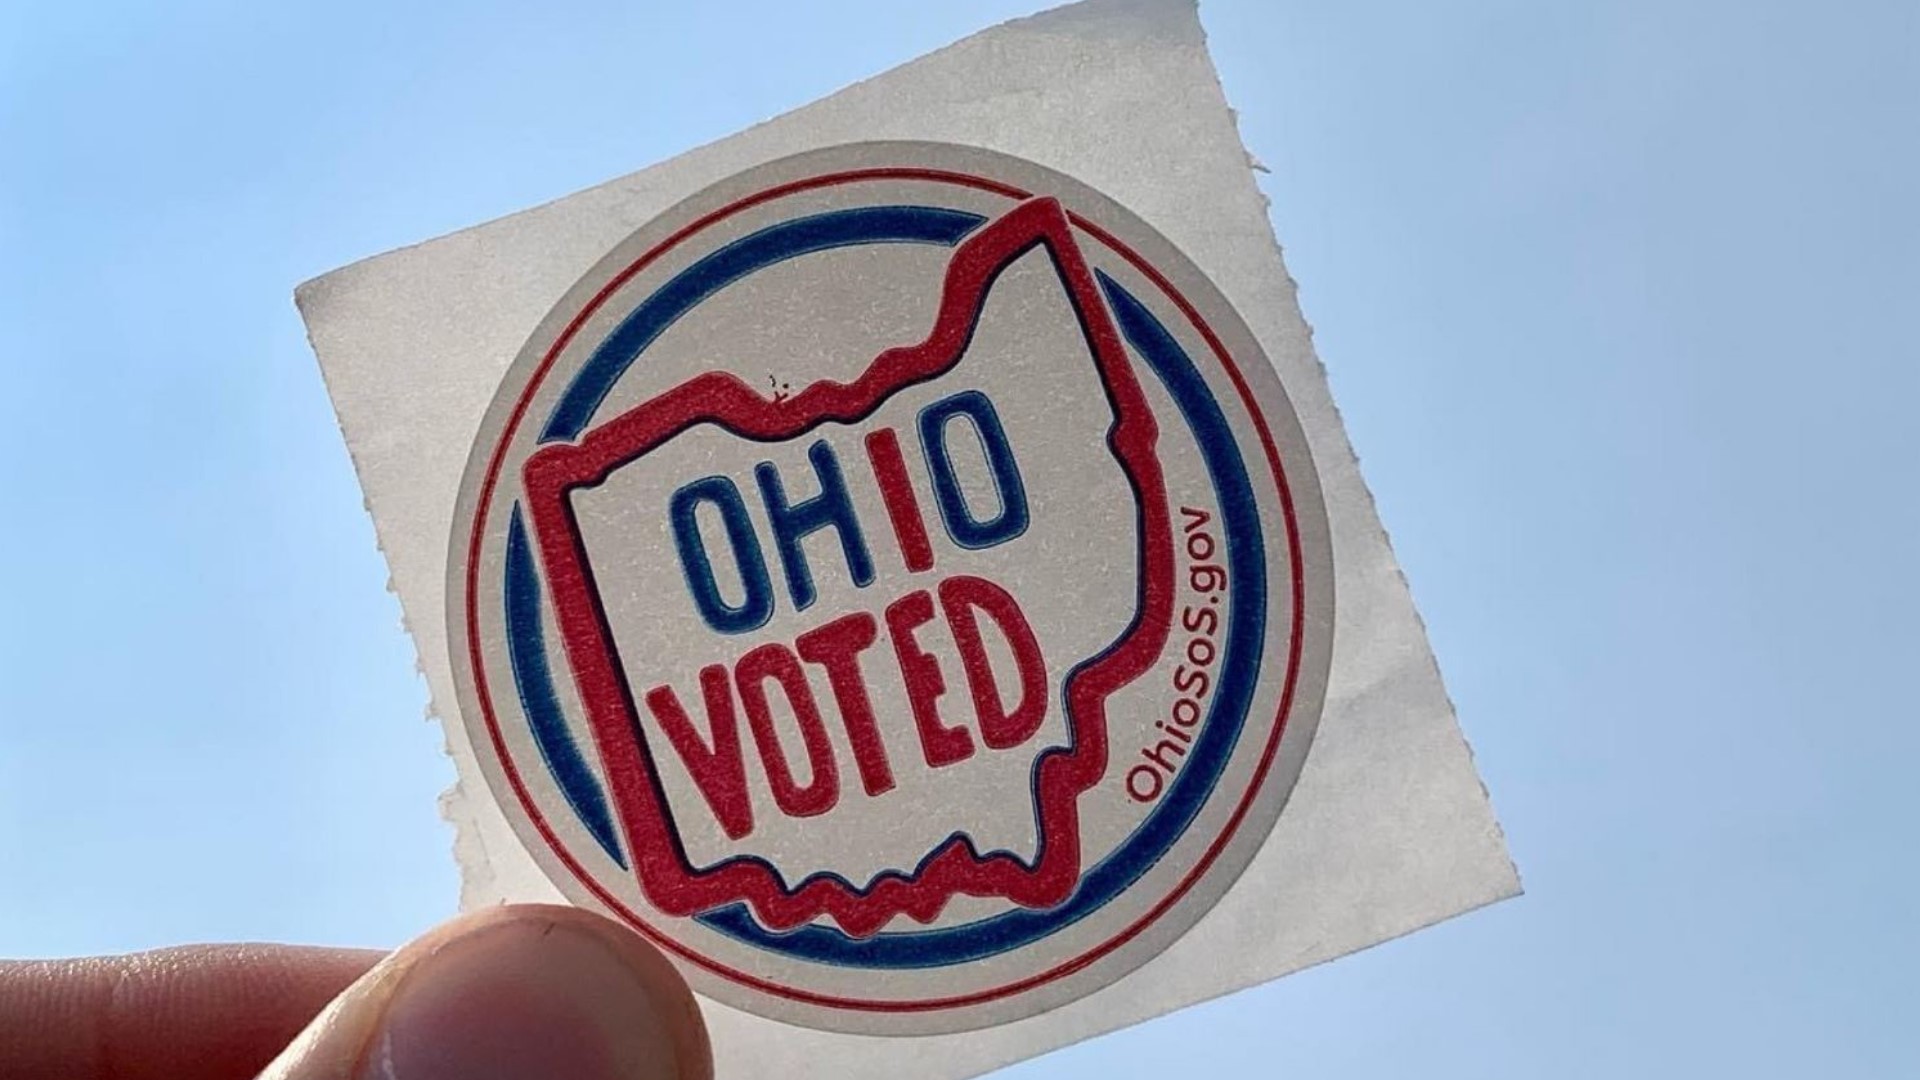 Issue 1, enshrining abortion access in the Ohio constitution, and Issue 2, recreational marijuana, both passed Tuesday night.